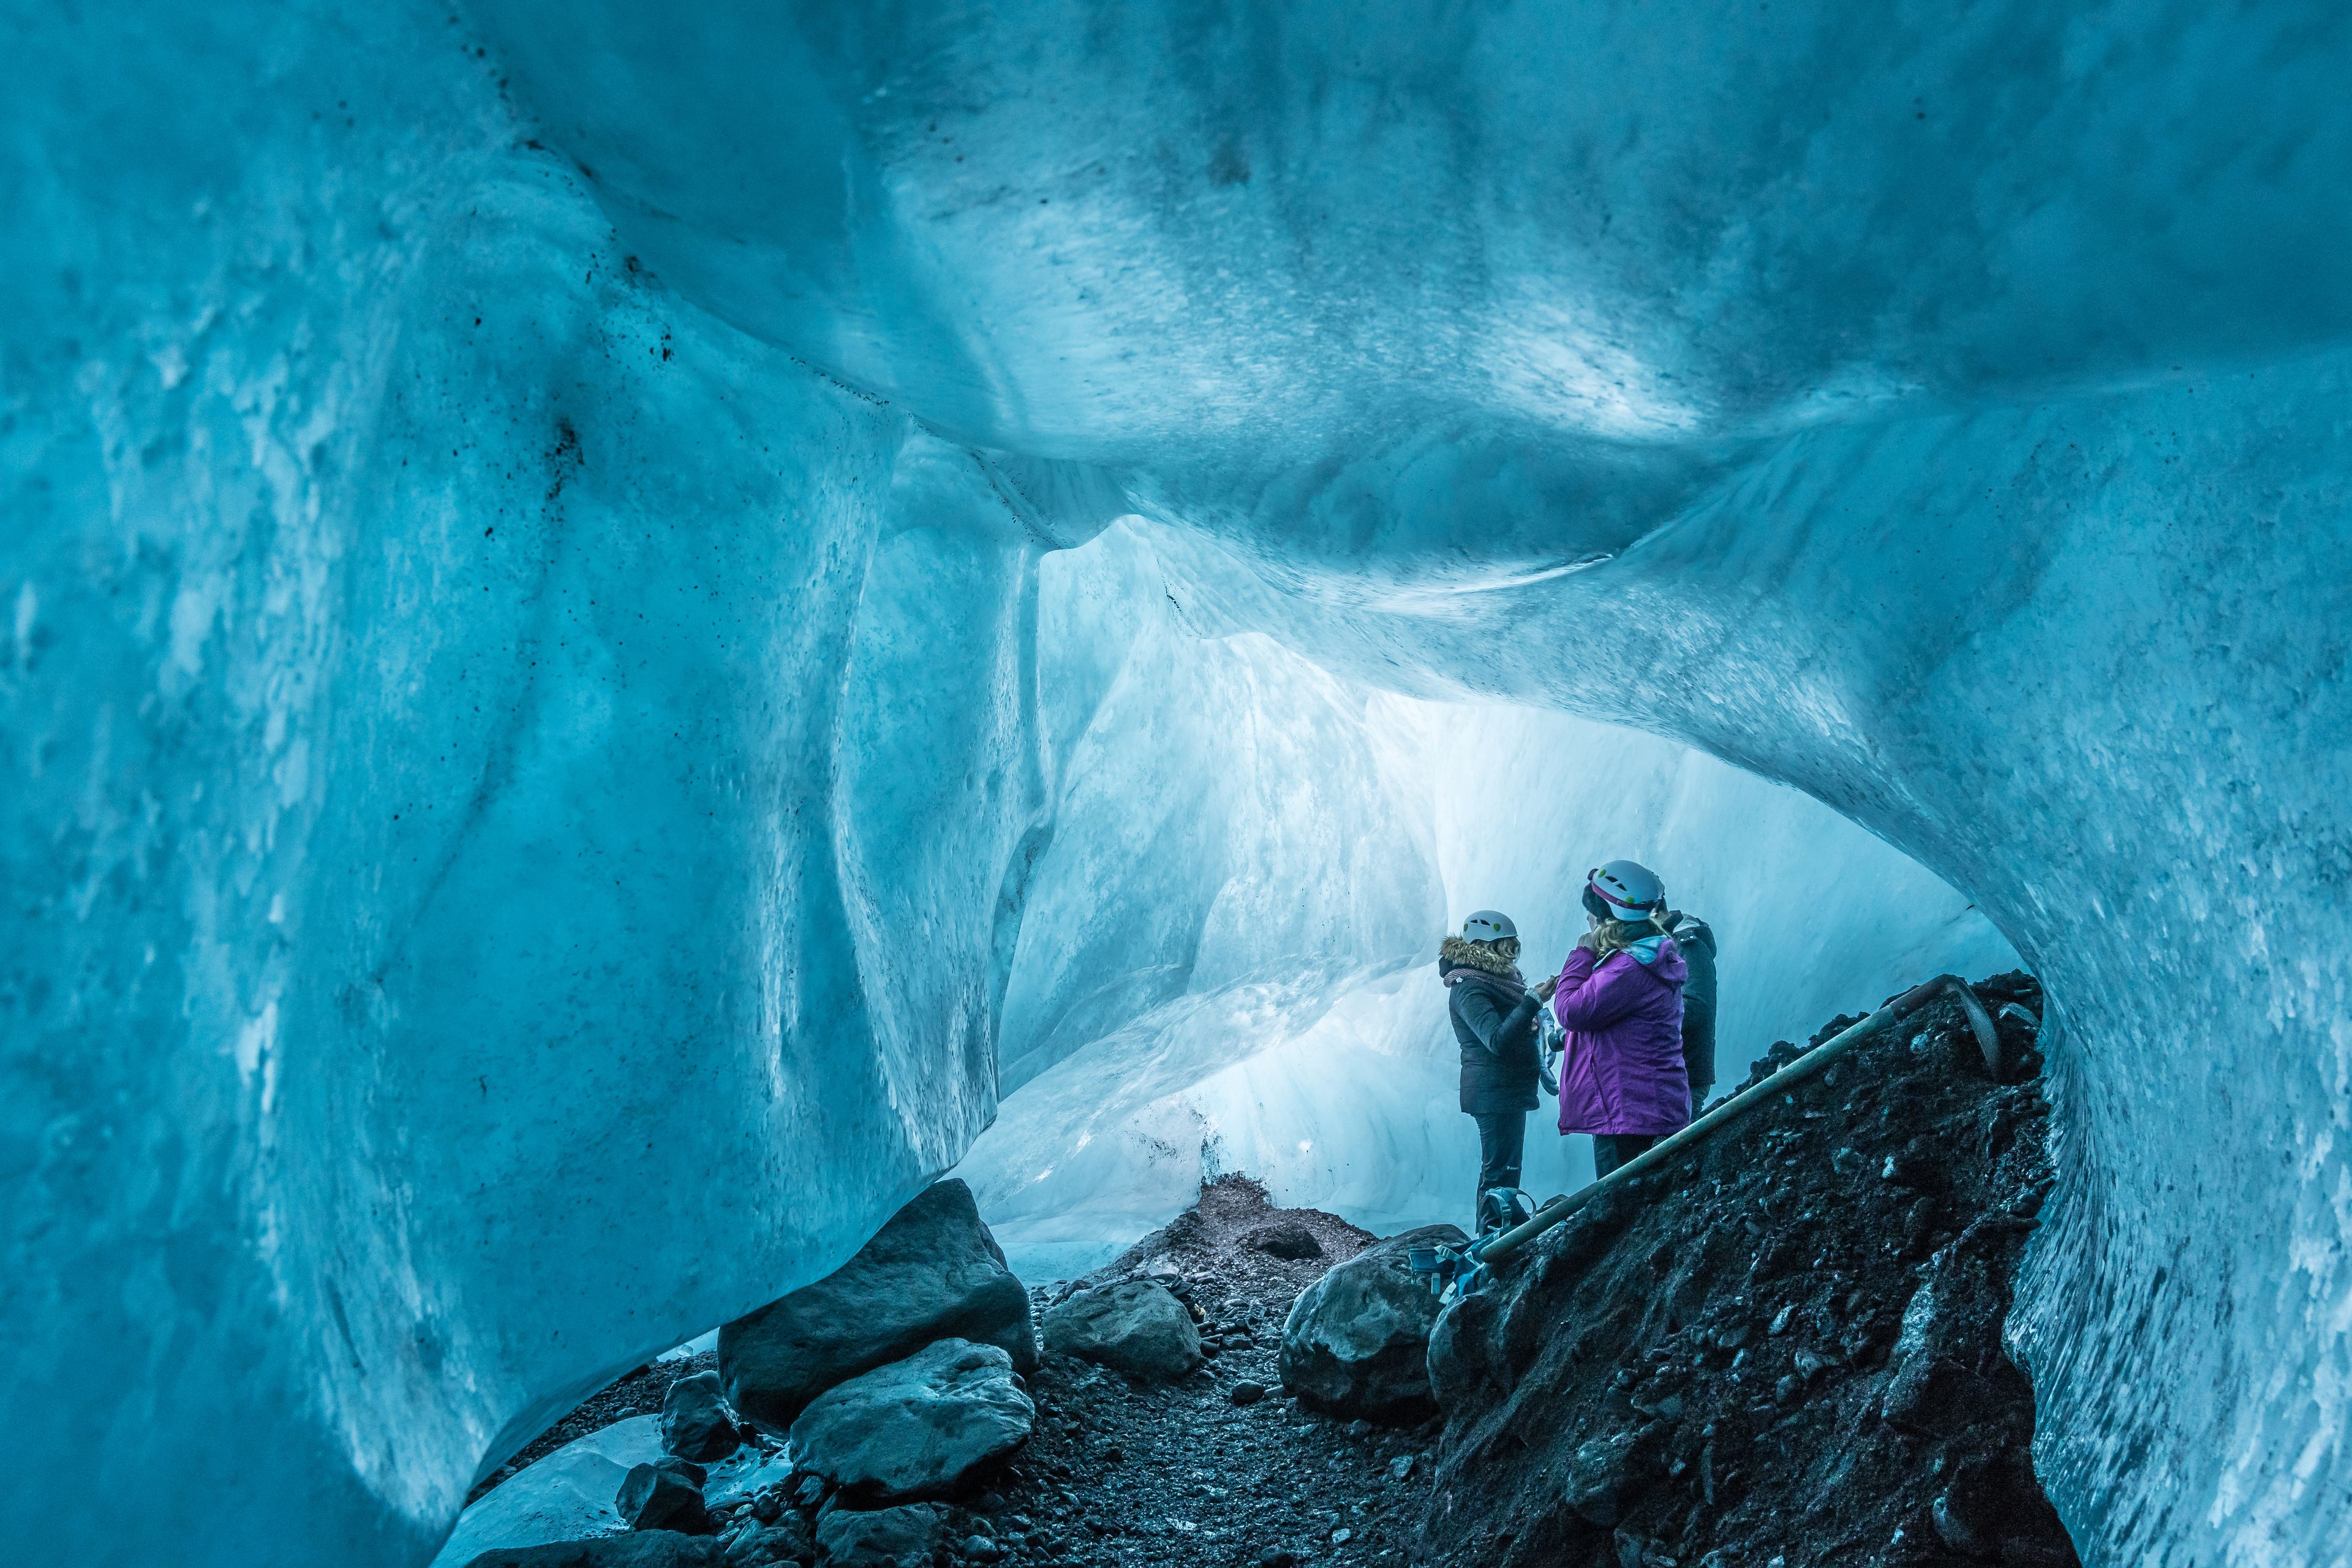 Ice cave exploration in Iceland